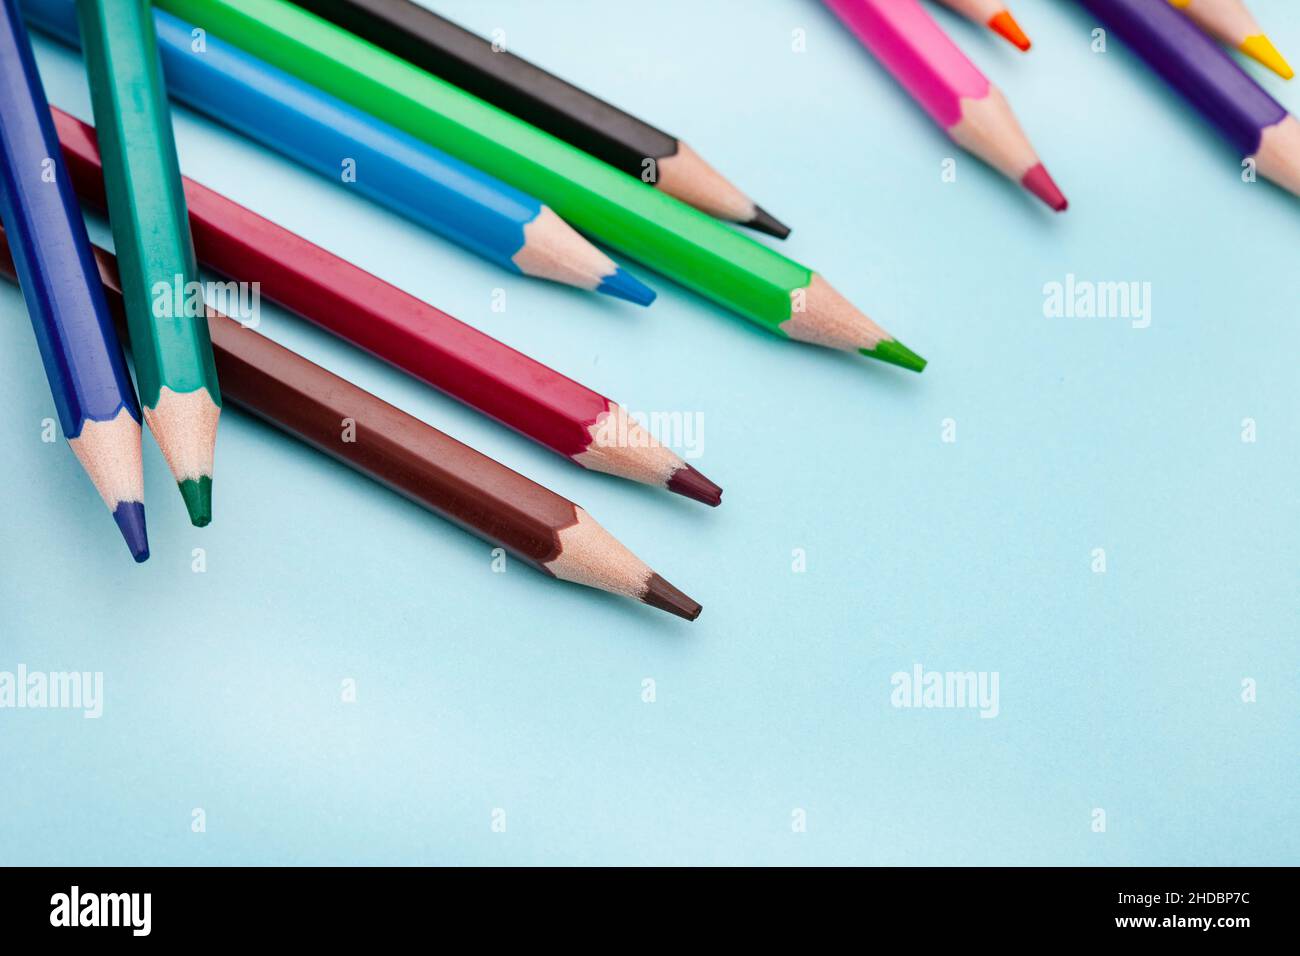 Colored pencils on bright colored background Stock Photo